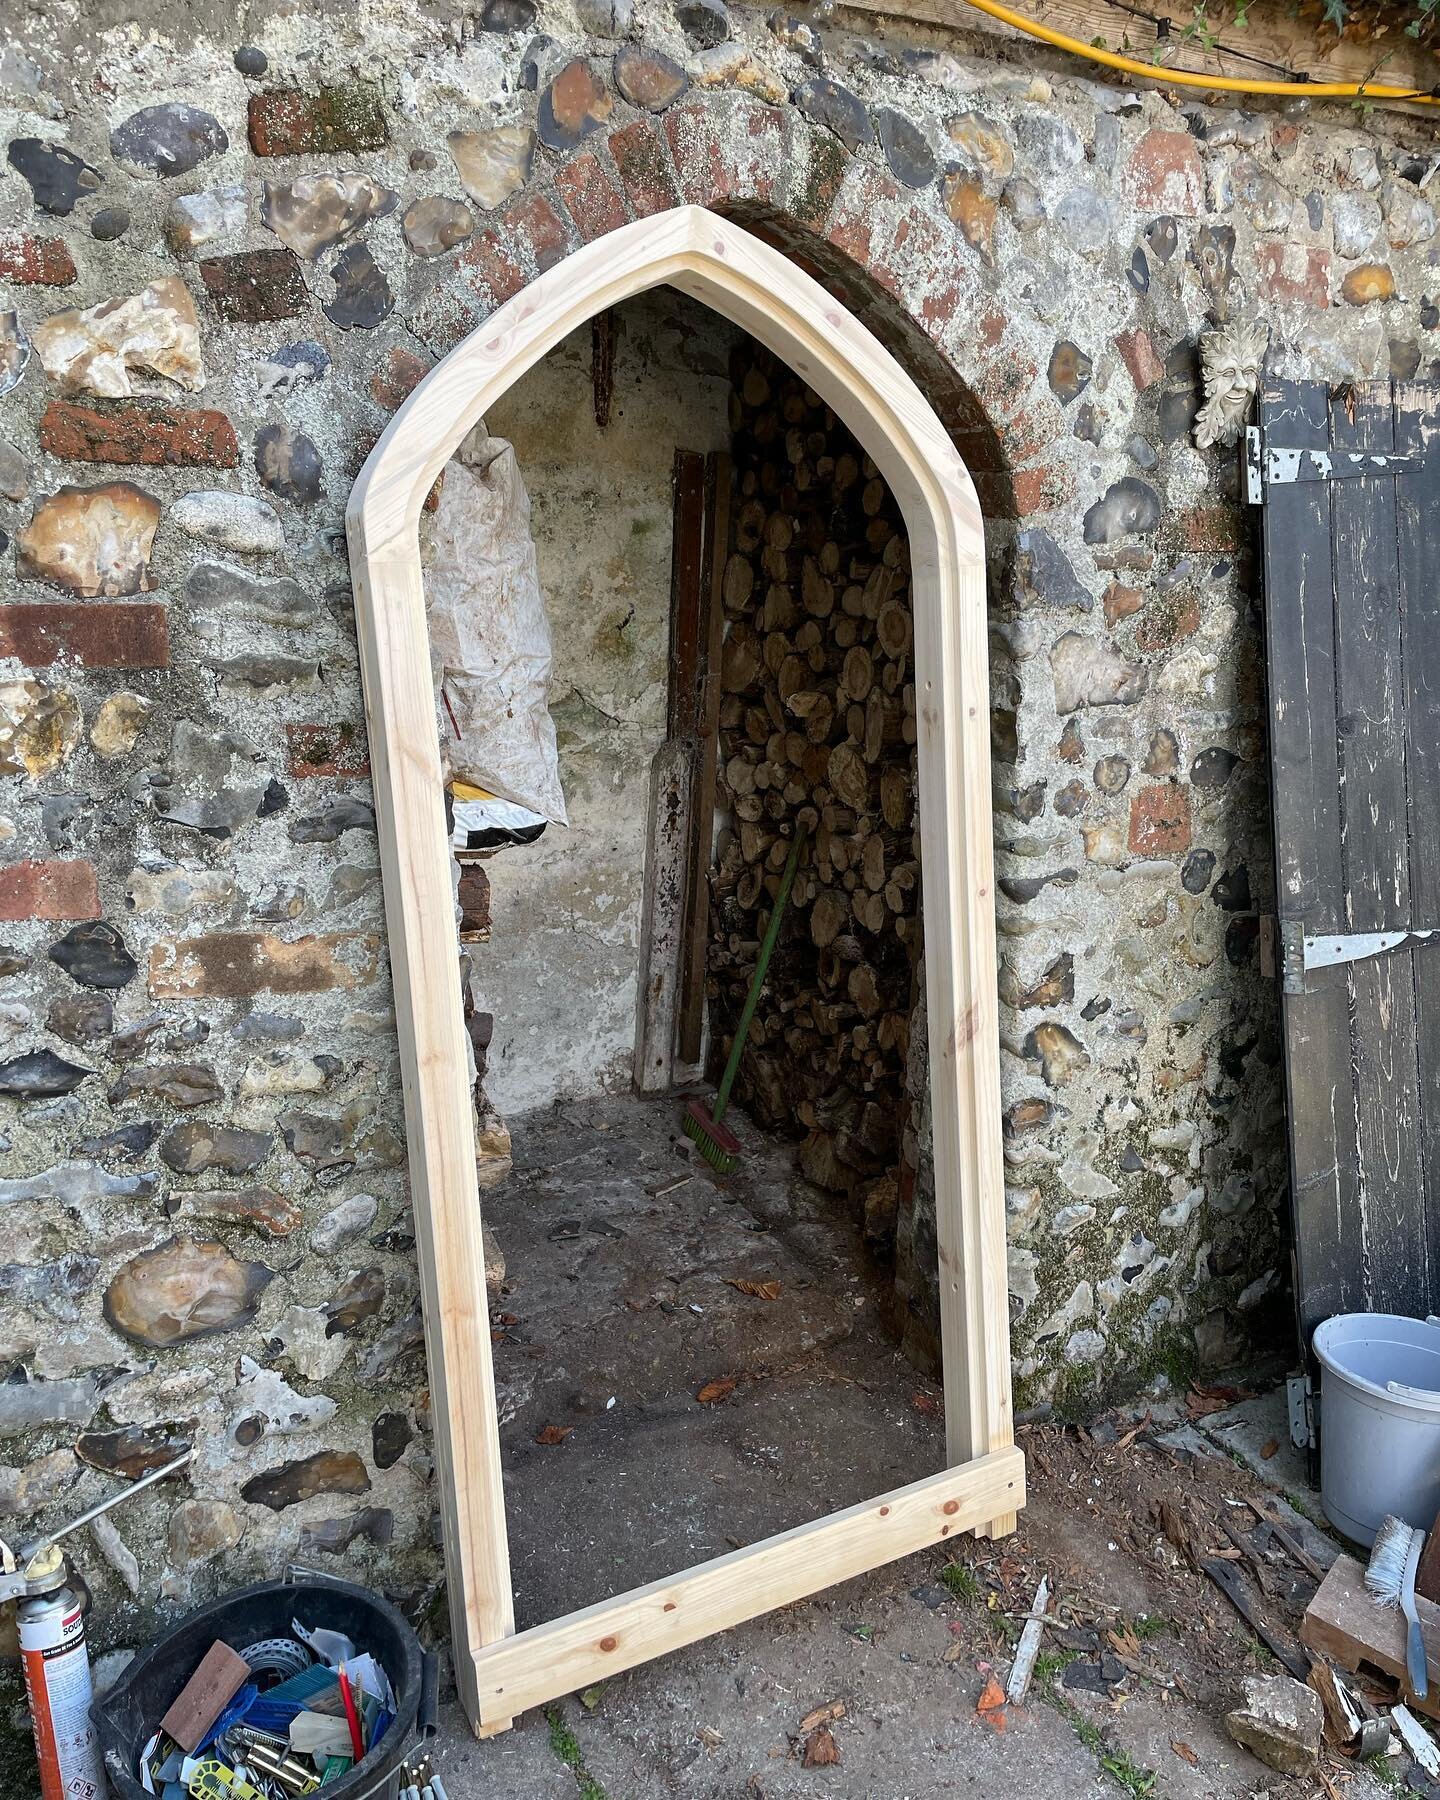 Gothic arch door frame made on site to replace the old rotten one.

#joinery#carpentry#carpenter#joiner#norfolk#northnorfolk#southnorfolk#homeimprovement